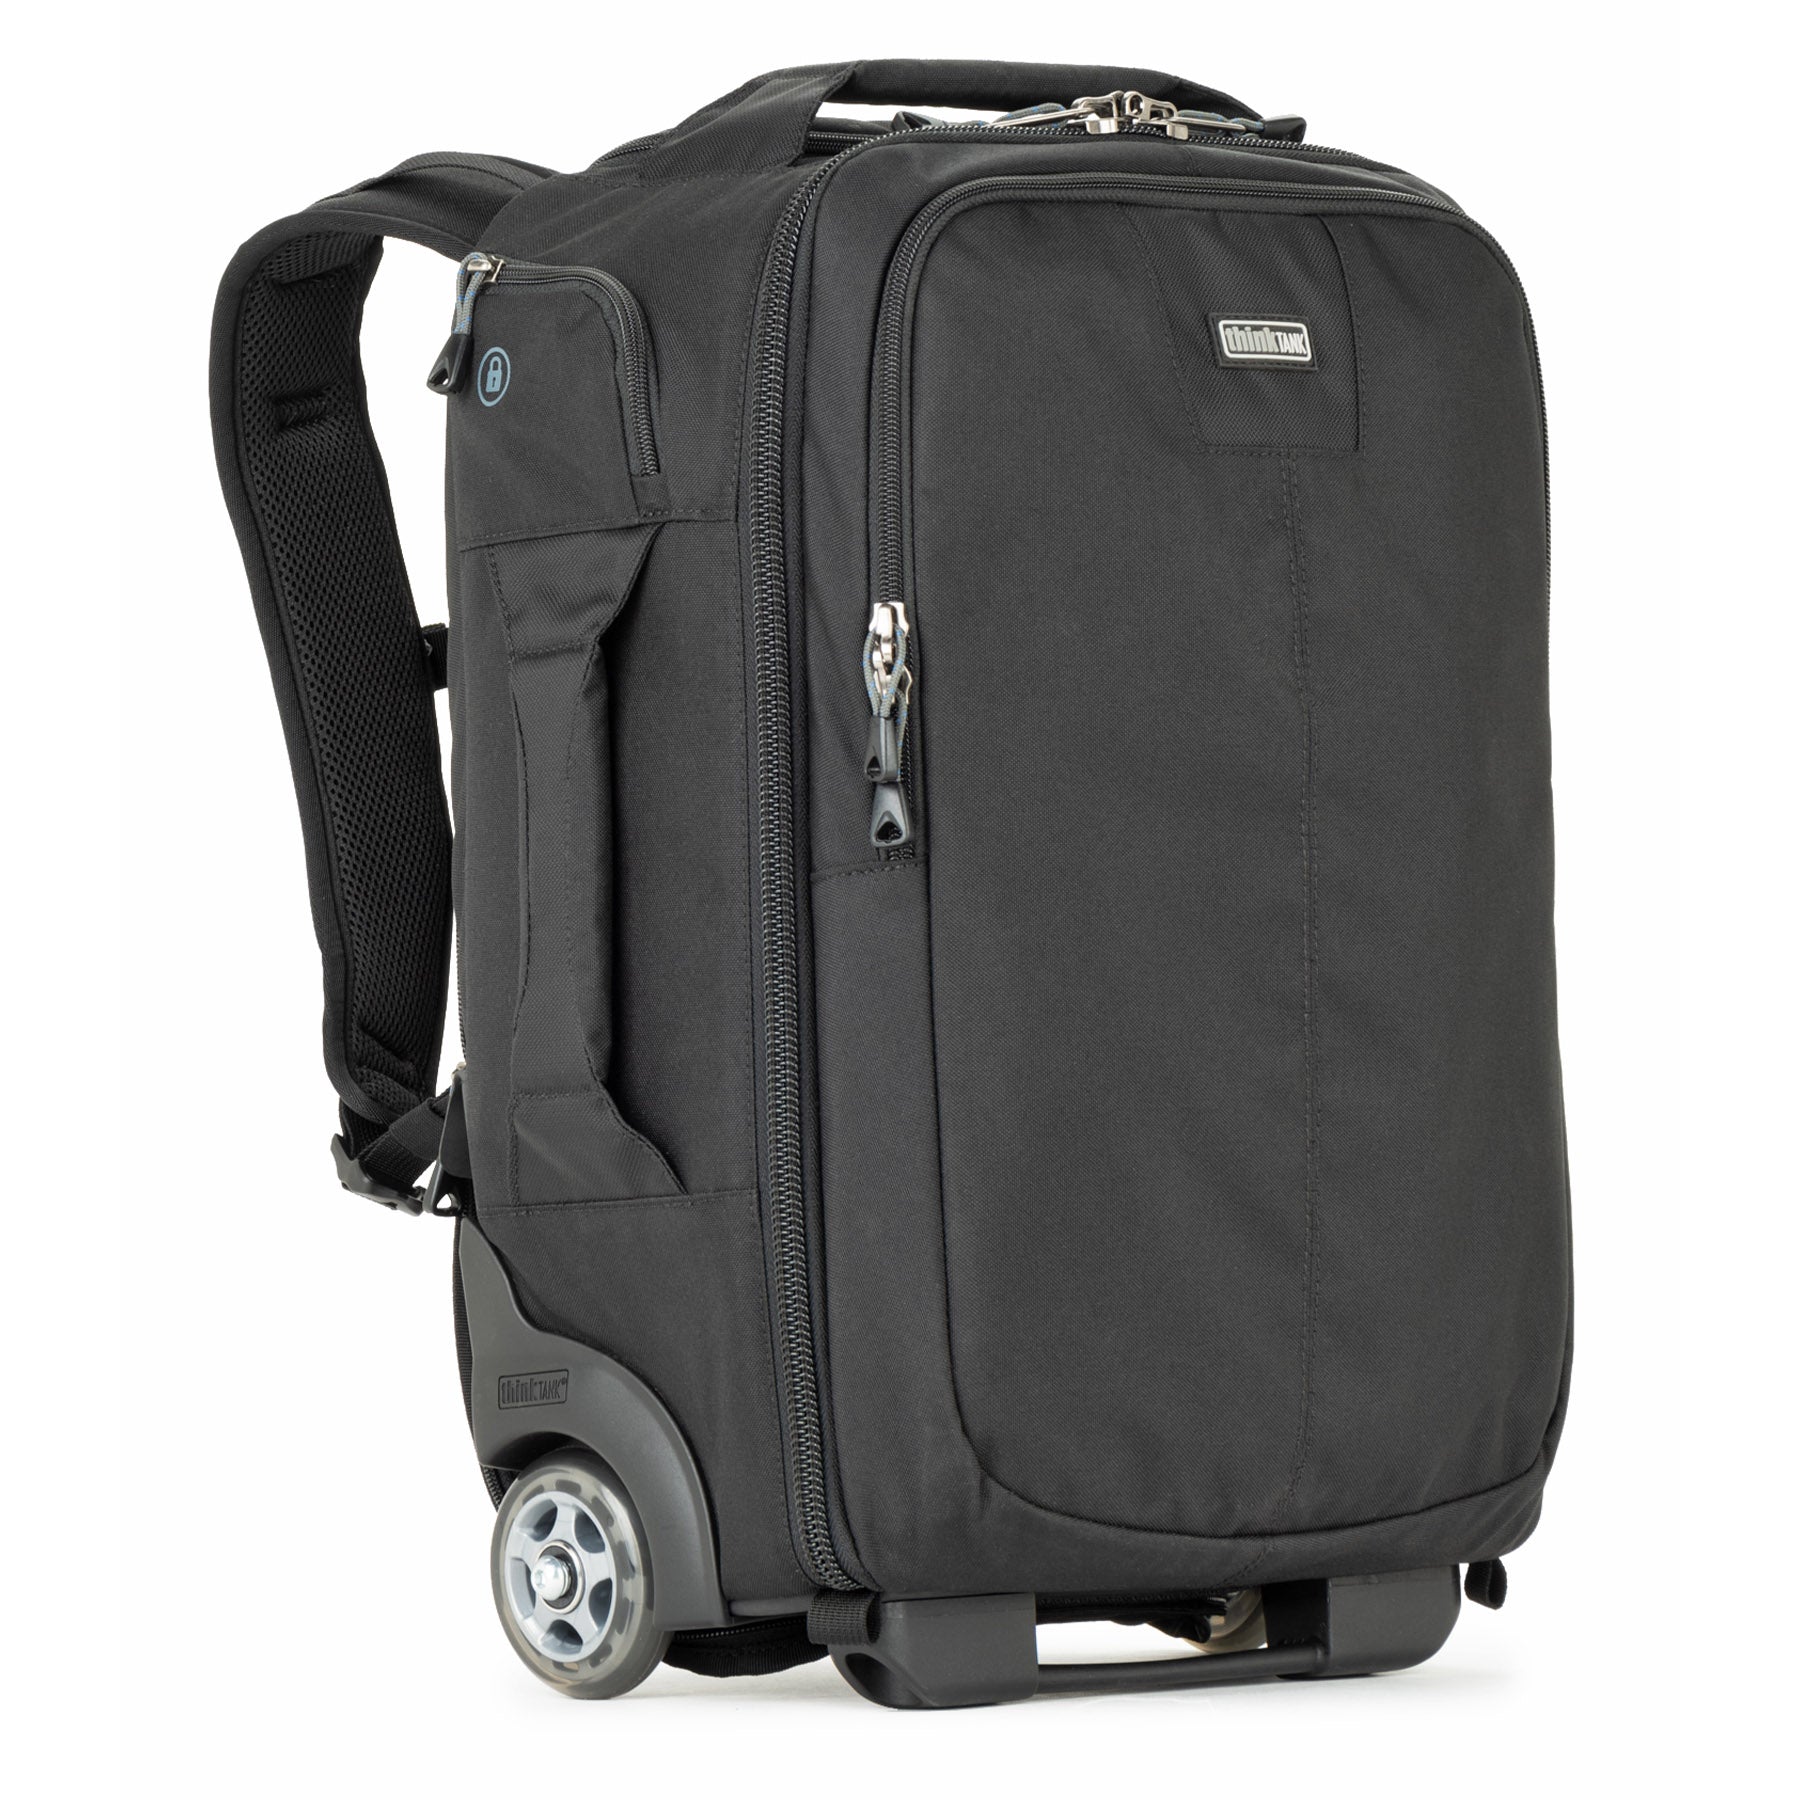 Sized to meet most airline carry-on requirements*, the Essentials fits two DSLR or Mirrorless bodies, a mounted 70–200mm, multiple lenses, and a 16-inch laptop.